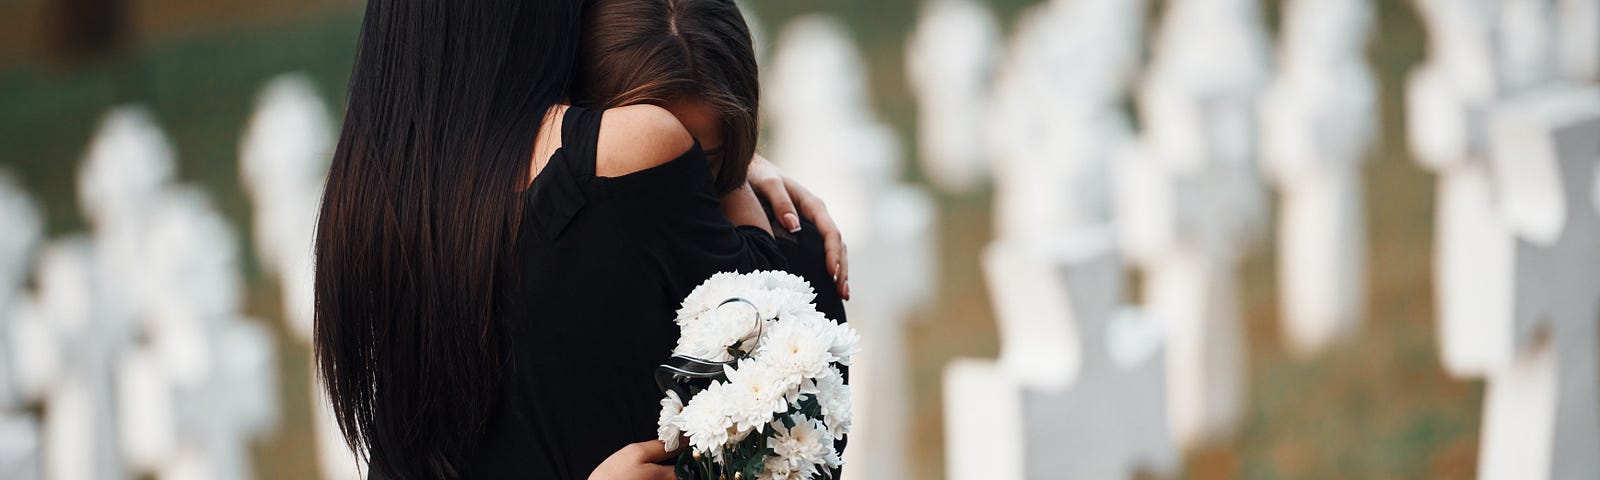 women embrace at cemetary